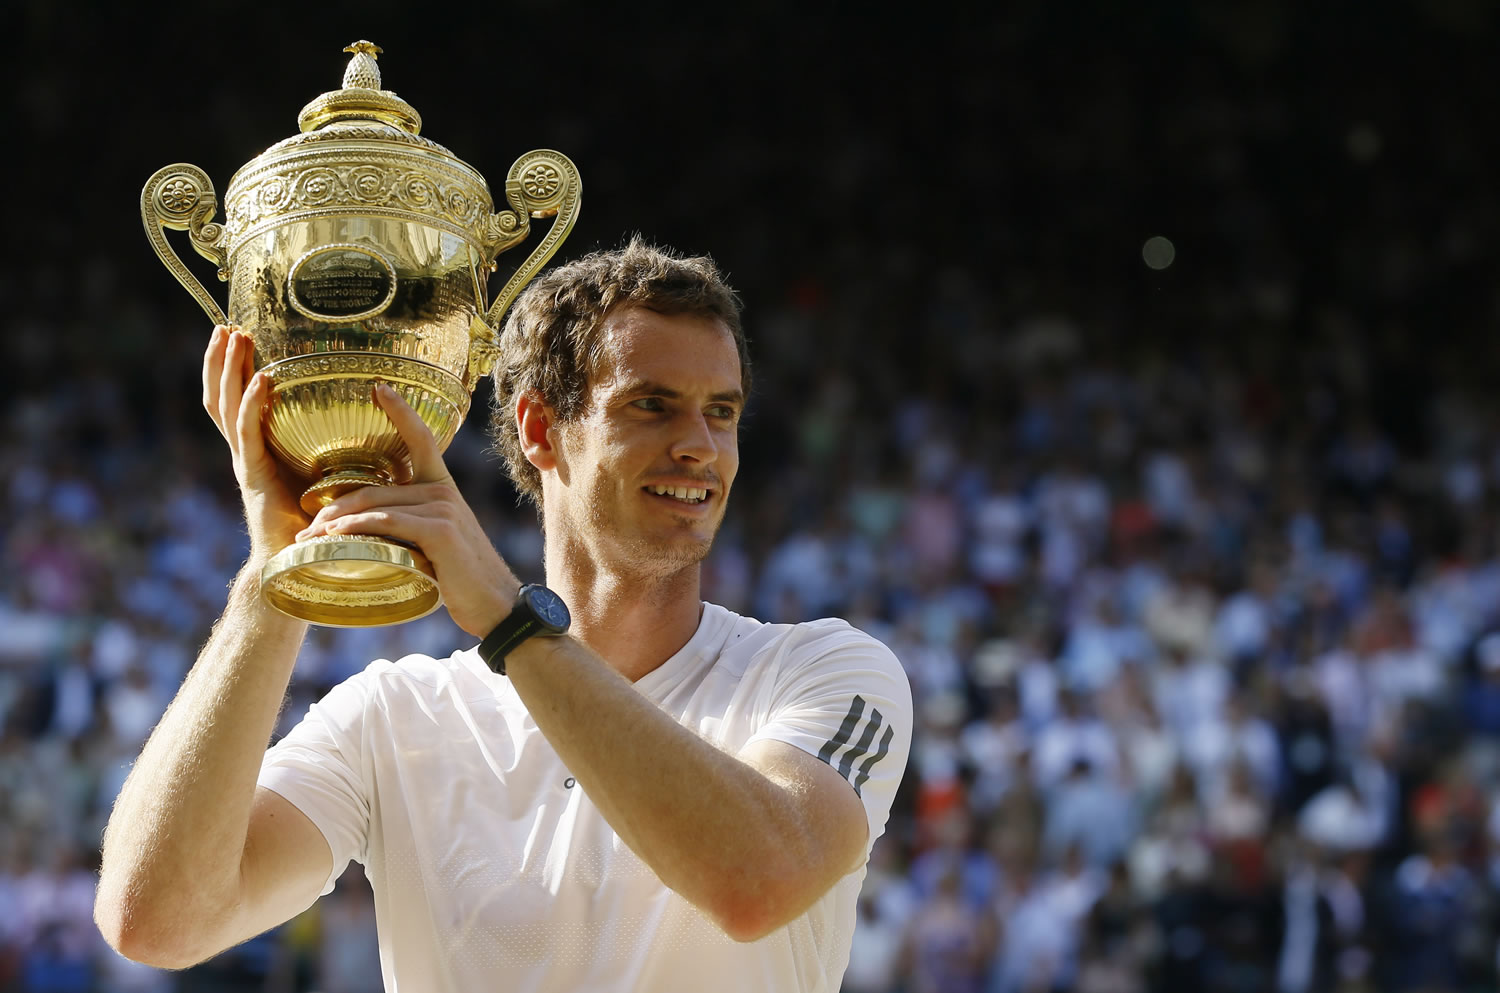 Andy Murray defeating Novak Djokovic in straight sets Sunday to become the first British tennis player in 77 years to win the Wimbledon men's singles title.